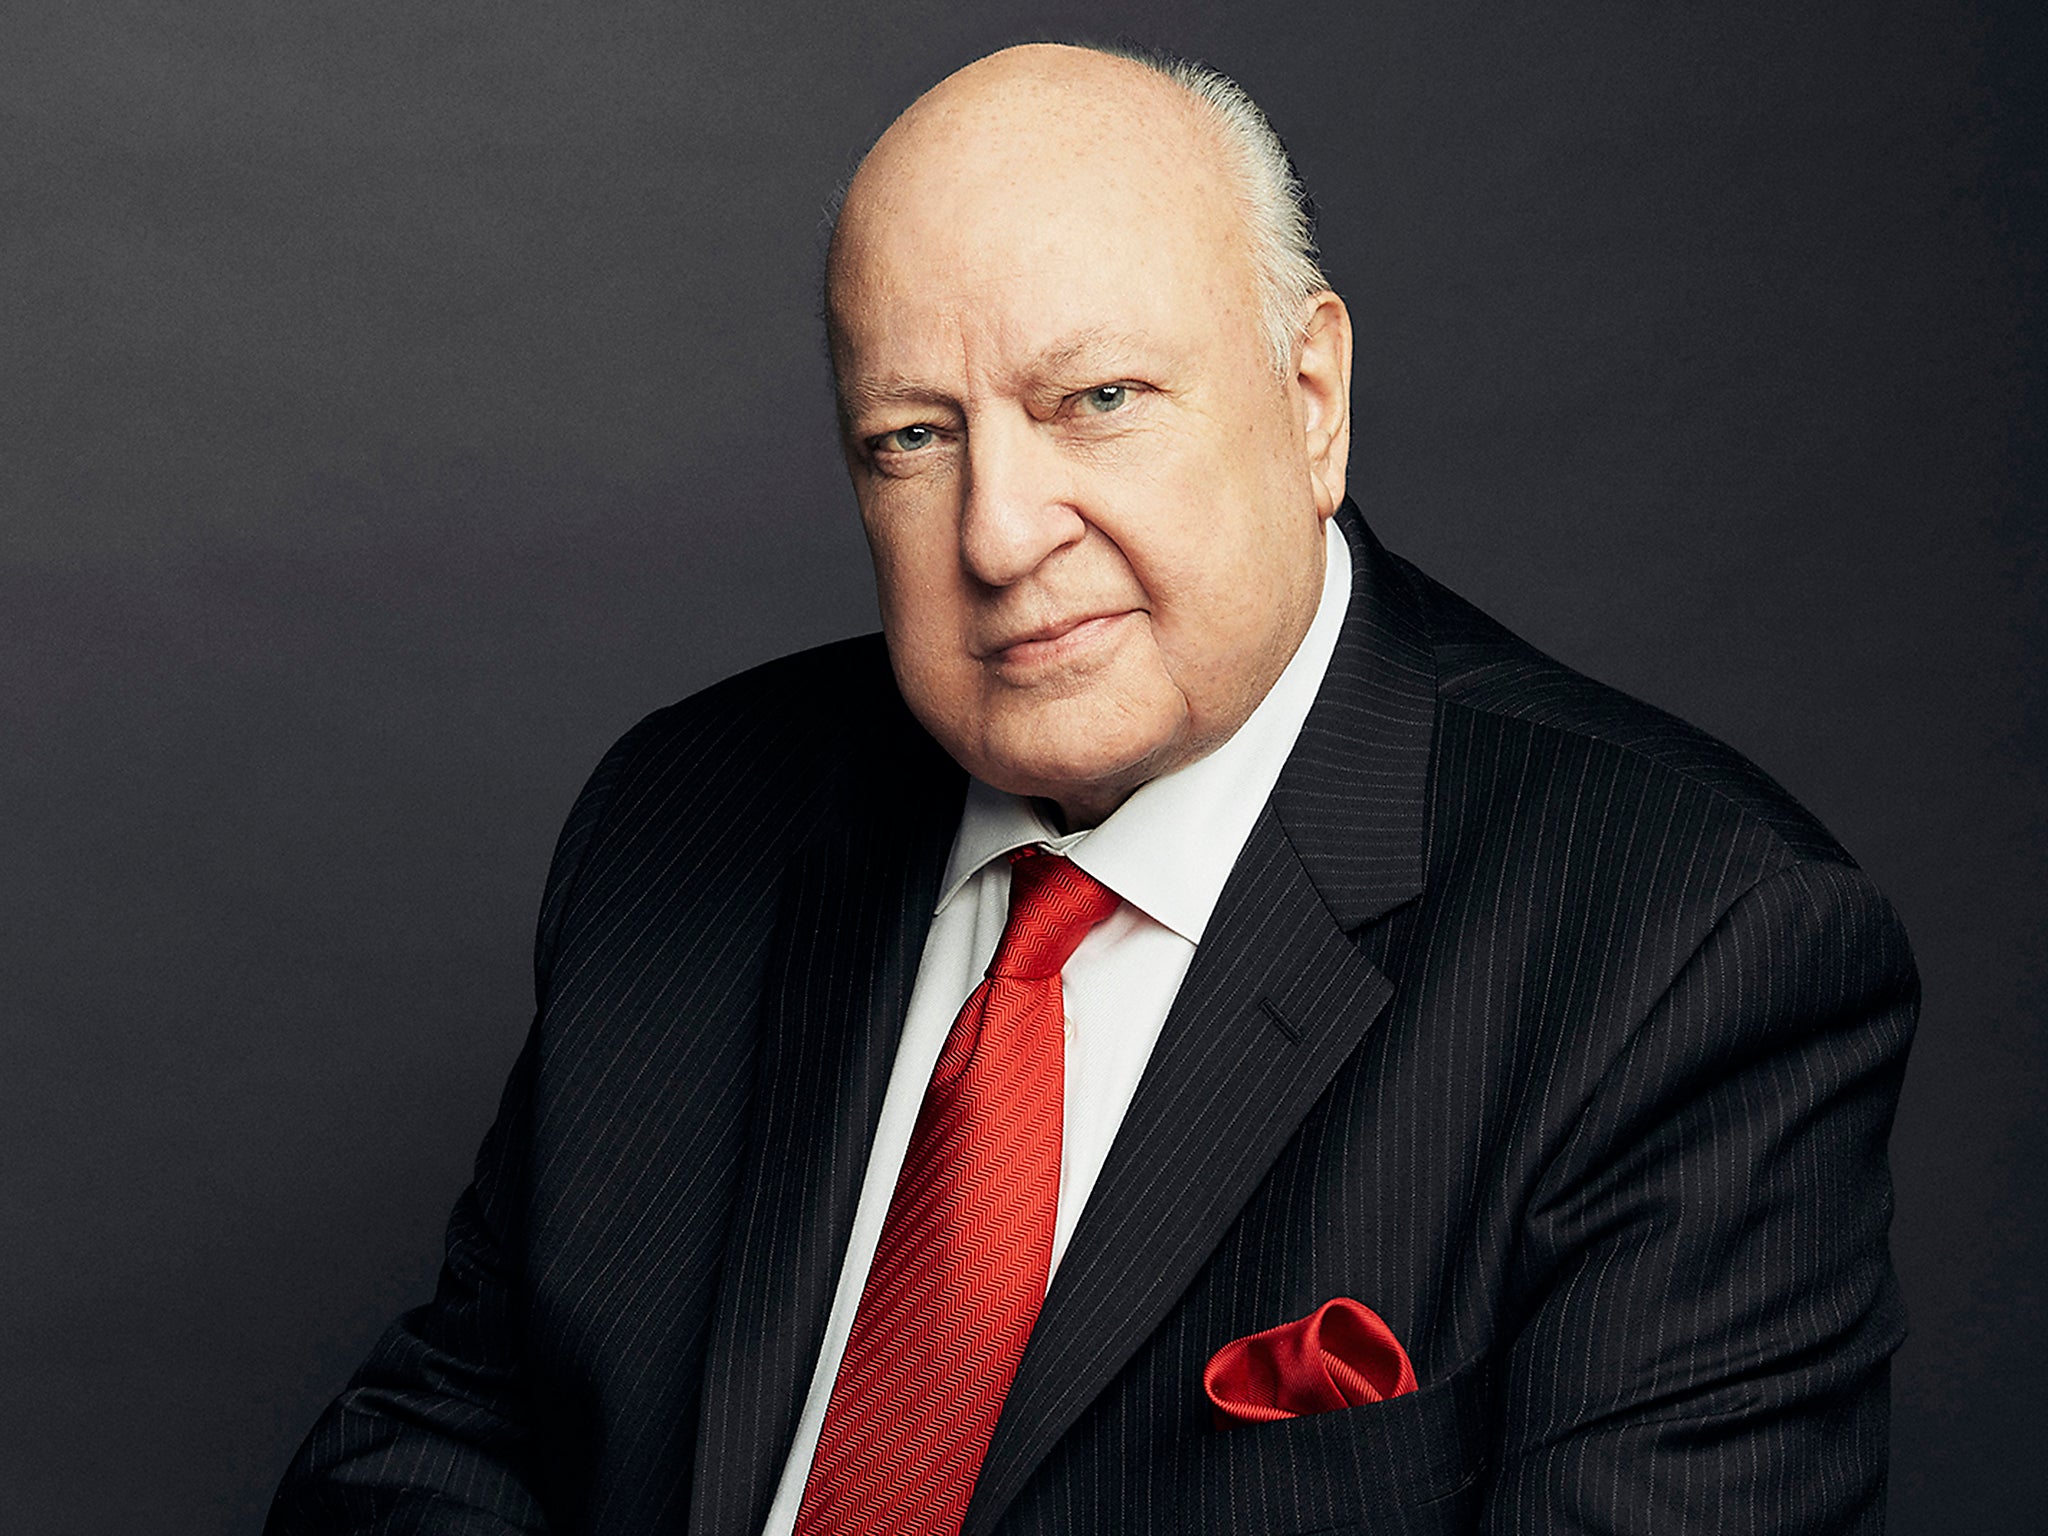 Arch-rival: former Fox News chief Roger Ailes, long-time nemesis of James and his siblings